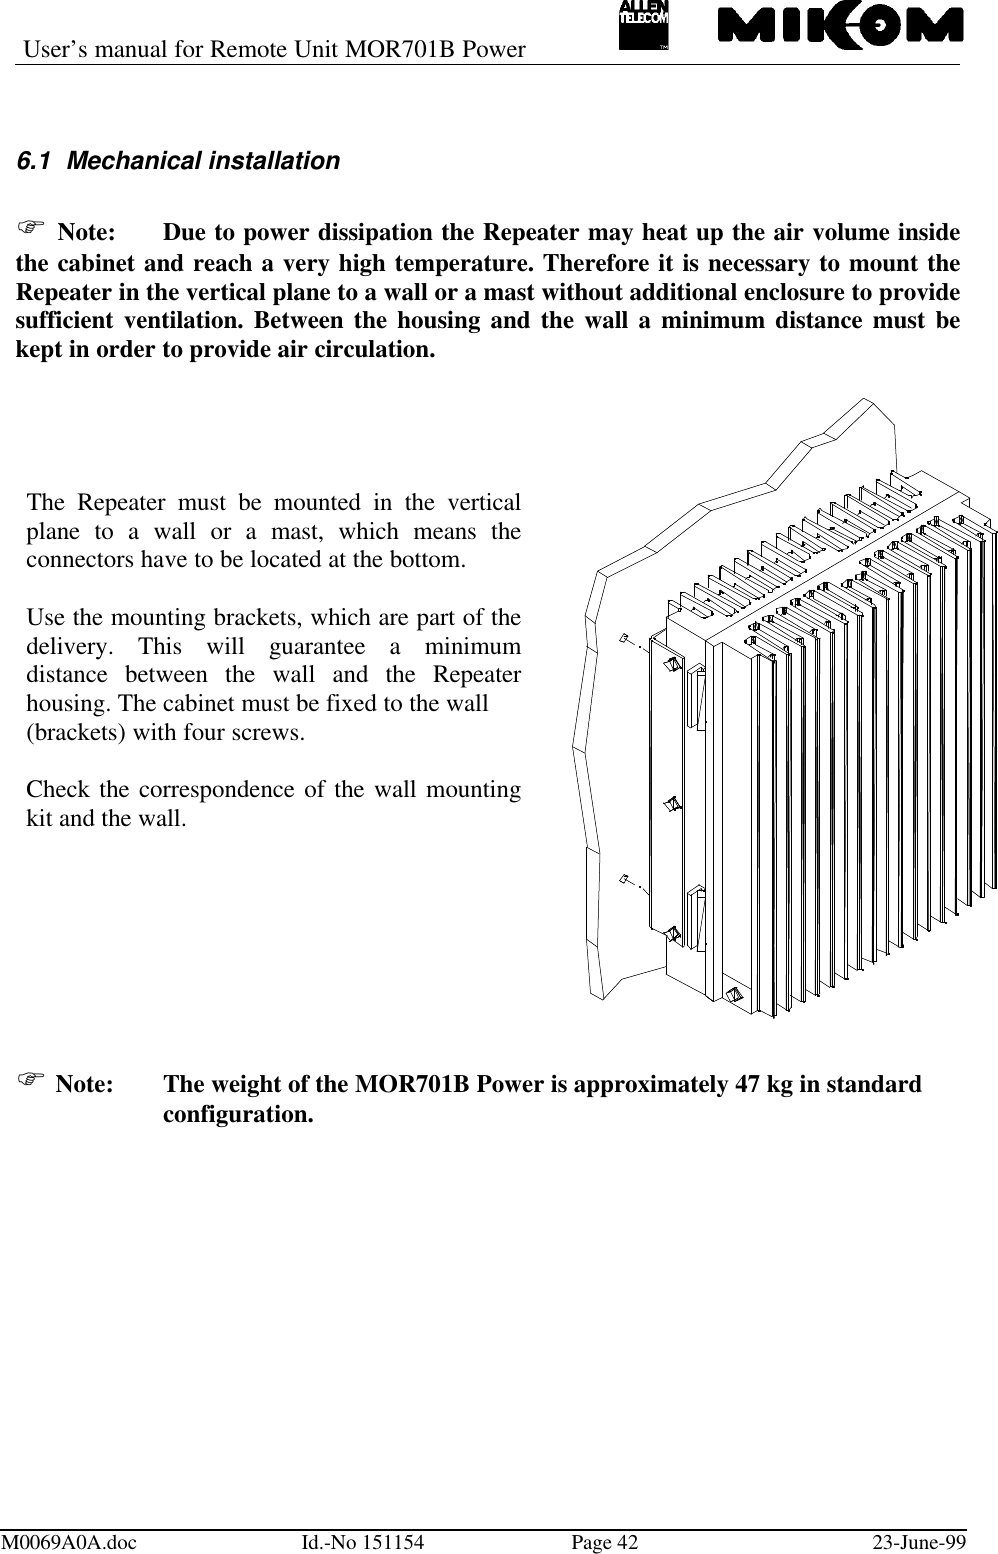 User’s manual for Remote Unit MOR701B PowerM0069A0A.doc Id.-No 151154 Page 42 23-June-996.1 Mechanical installationF Note: Due to power dissipation the Repeater may heat up the air volume insidethe cabinet and reach a very high temperature. Therefore it is necessary to mount theRepeater in the vertical plane to a wall or a mast without additional enclosure to providesufficient ventilation. Between the housing and the wall a minimum distance must bekept in order to provide air circulation.F Note: The weight of the MOR701B Power is approximately 47 kg in standardconfiguration.The Repeater must be mounted in the verticalplane to a wall or a mast, which means theconnectors have to be located at the bottom.Use the mounting brackets, which are part of thedelivery. This will guarantee a minimumdistance between the wall and the Repeaterhousing. The cabinet must be fixed to the wall(brackets) with four screws.Check the correspondence of the wall mountingkit and the wall.